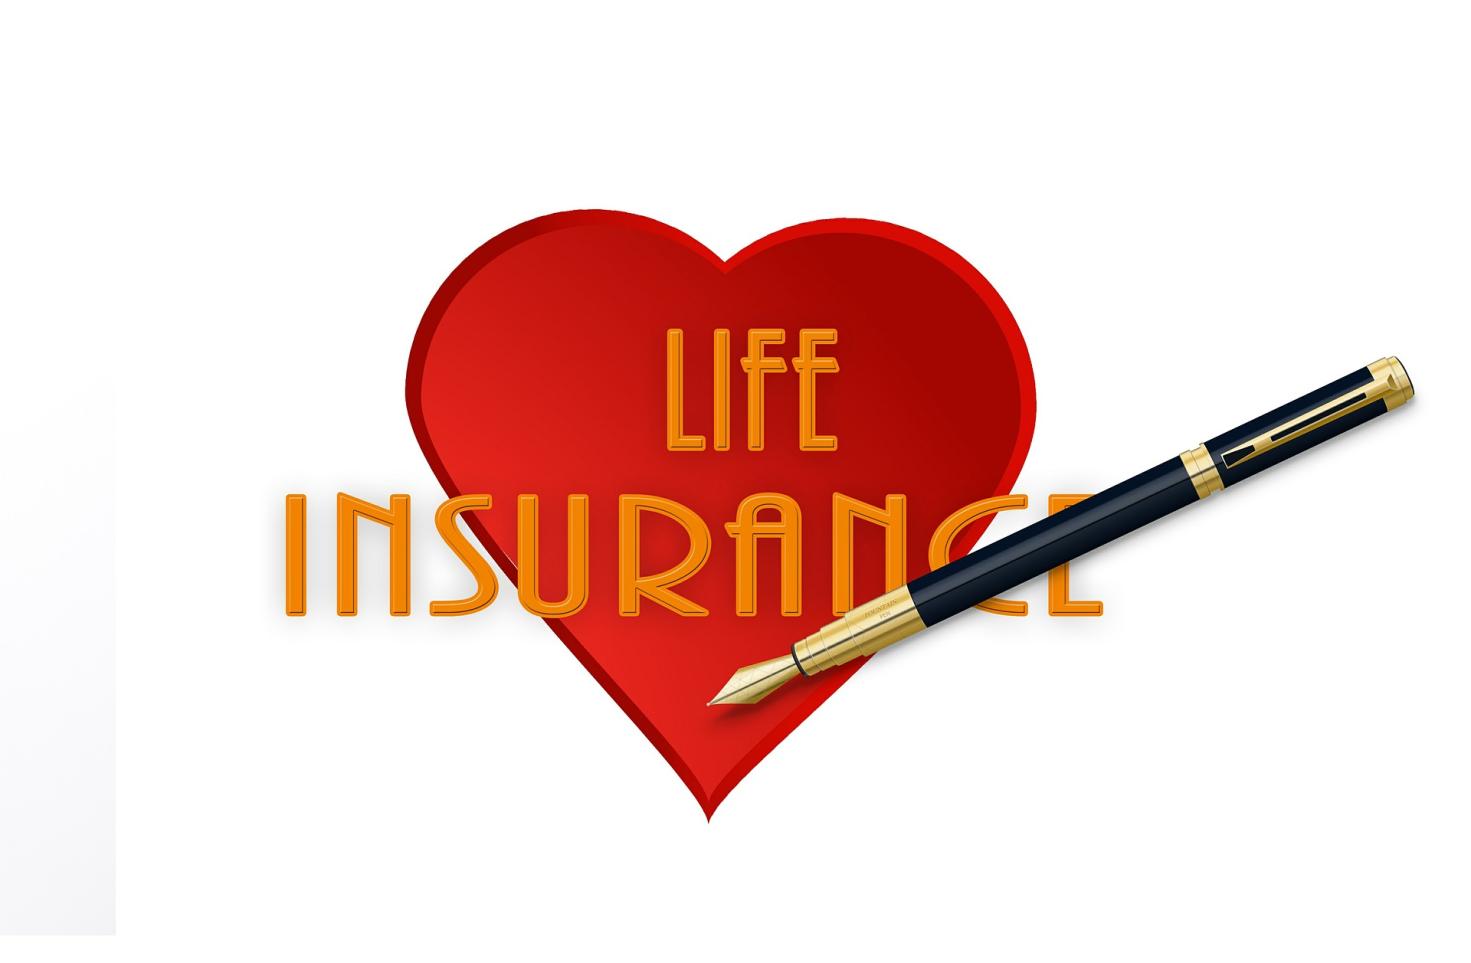 What Should I Consider When Choosing a Vehicle Insurance or Life Insurance Policy?